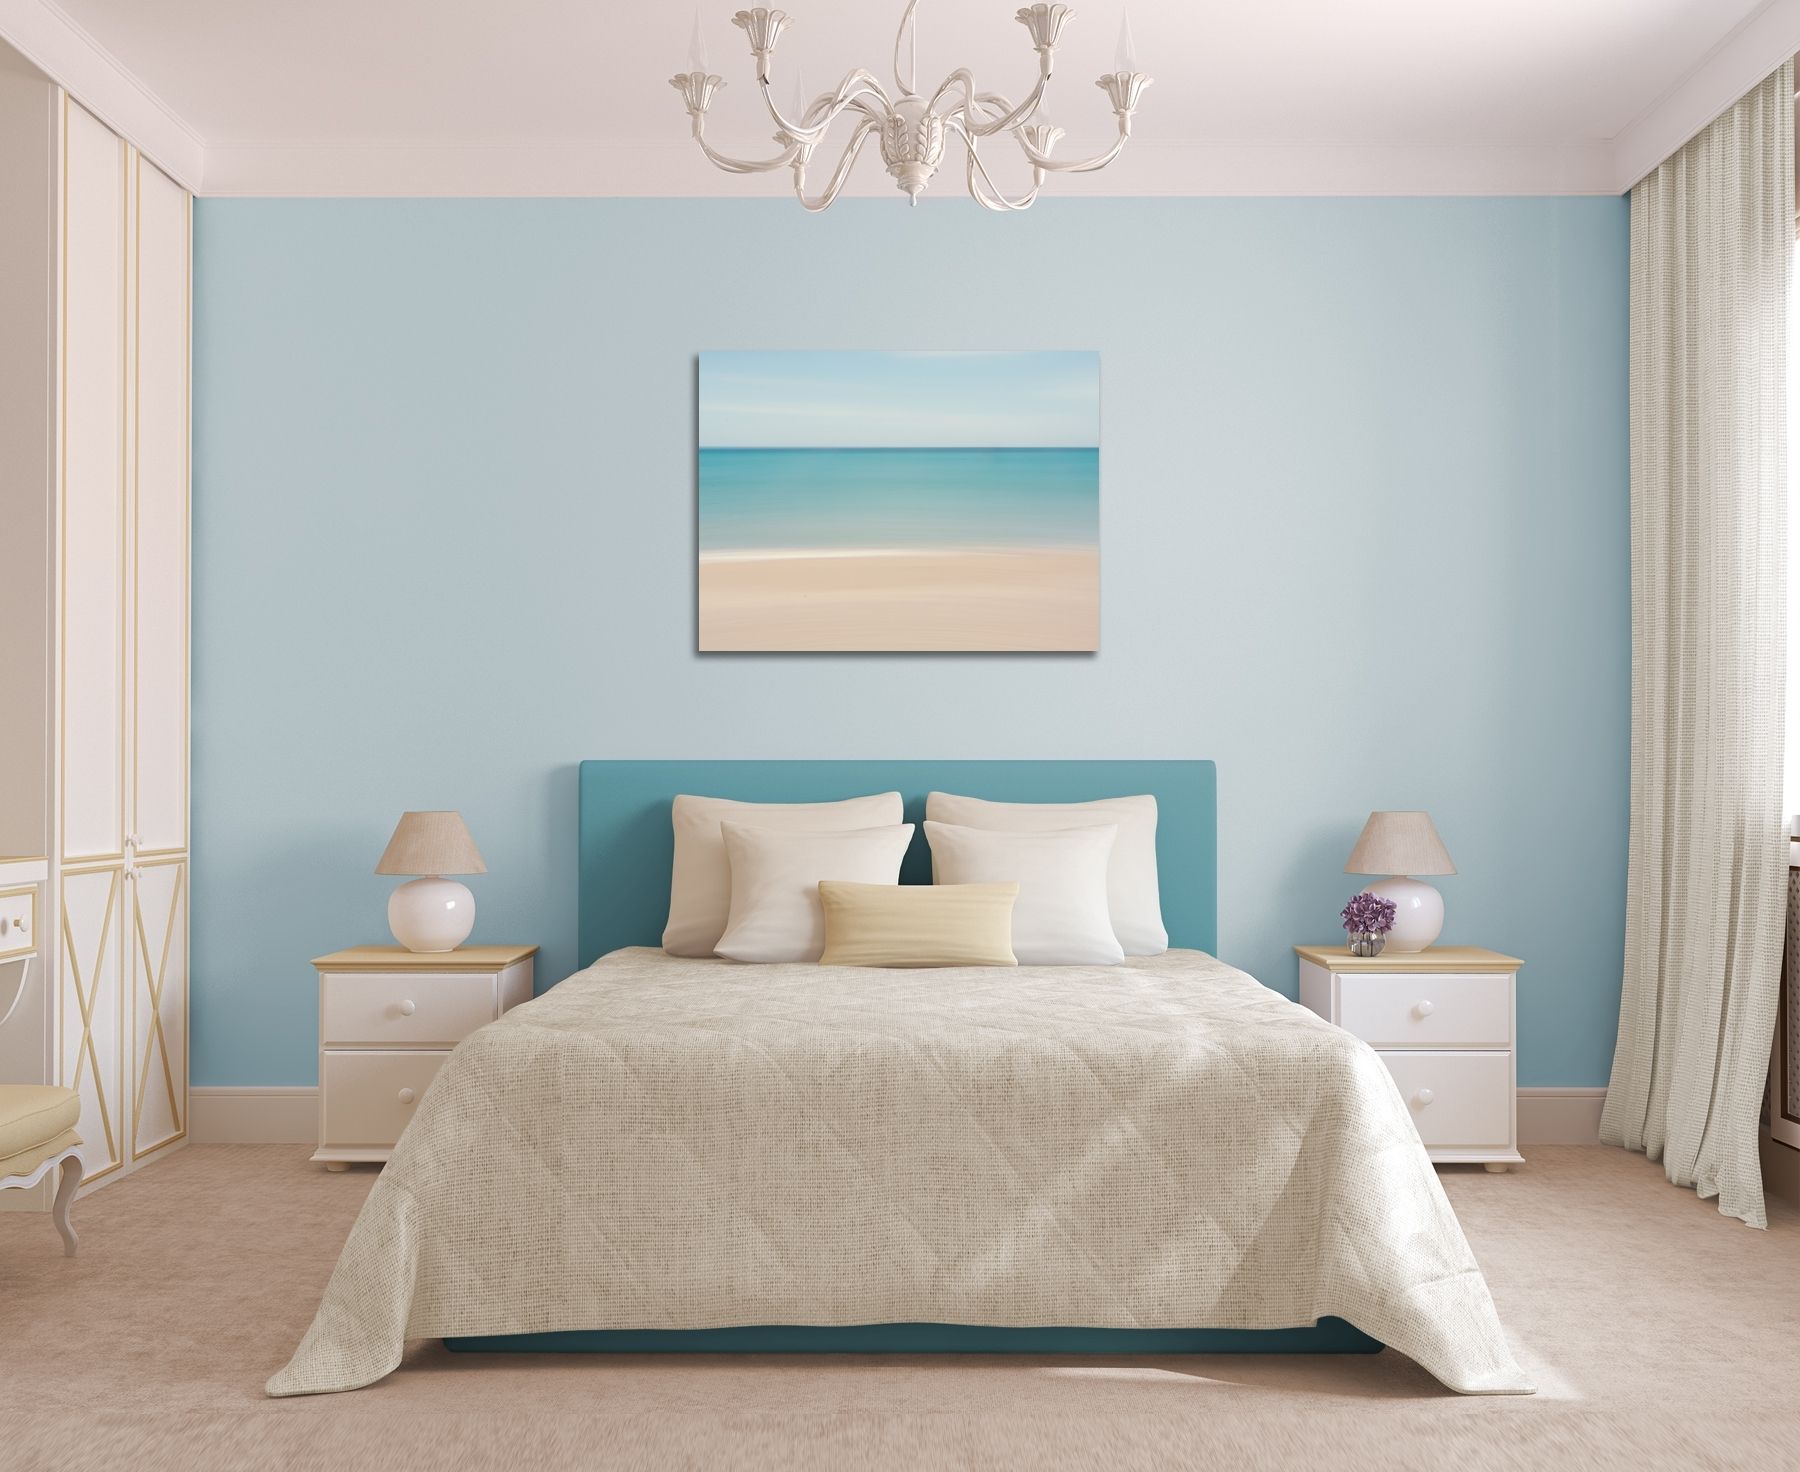 Beach Decor, Canvas Gallery Wrap, Abstract Ocean Photo, Large Wall For Trendy Beach Wall Art For Bedroom (View 1 of 15)